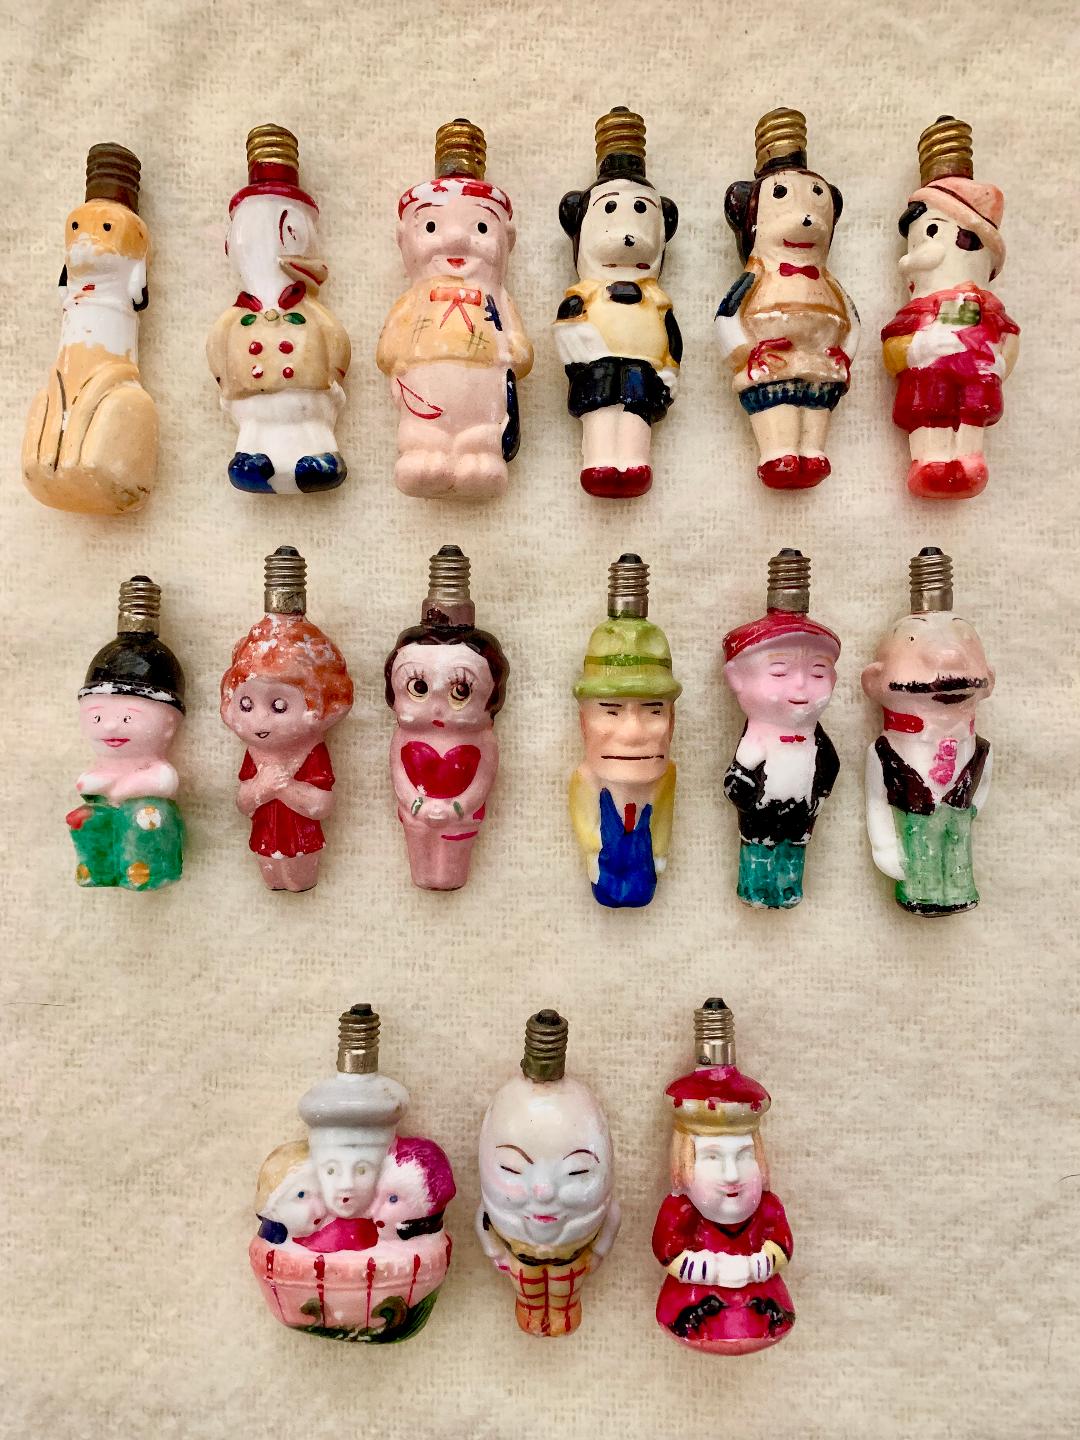 Cool collection of vintage milk glass figural light bulbs #vintage #vintagecollections #vintagechristmas #vintagecollectibles #collections #collectibles #collector #christmaslights #milkglass 